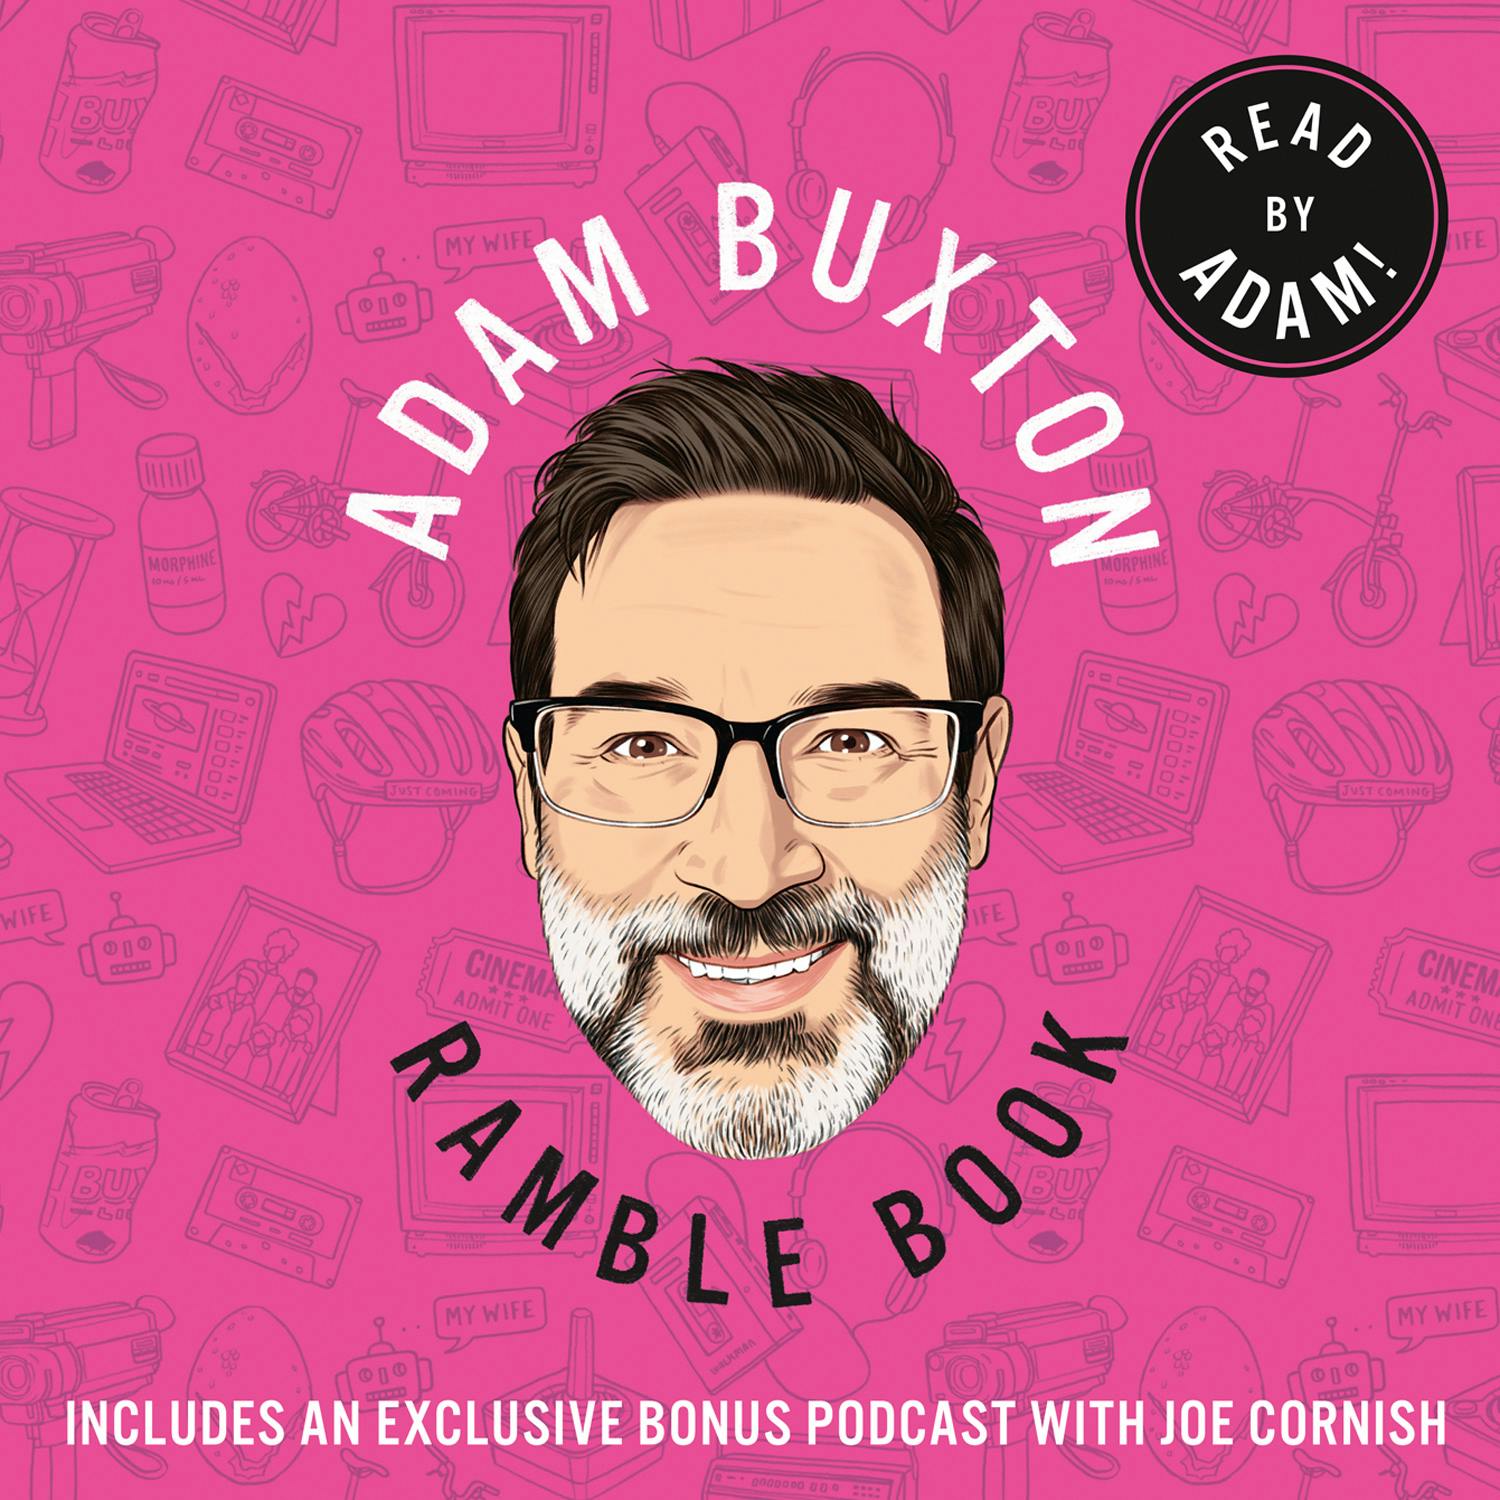 Ramble Book: Musings on Childhood, Friendship, Family and 80s Pop Culture - Adam Buxton